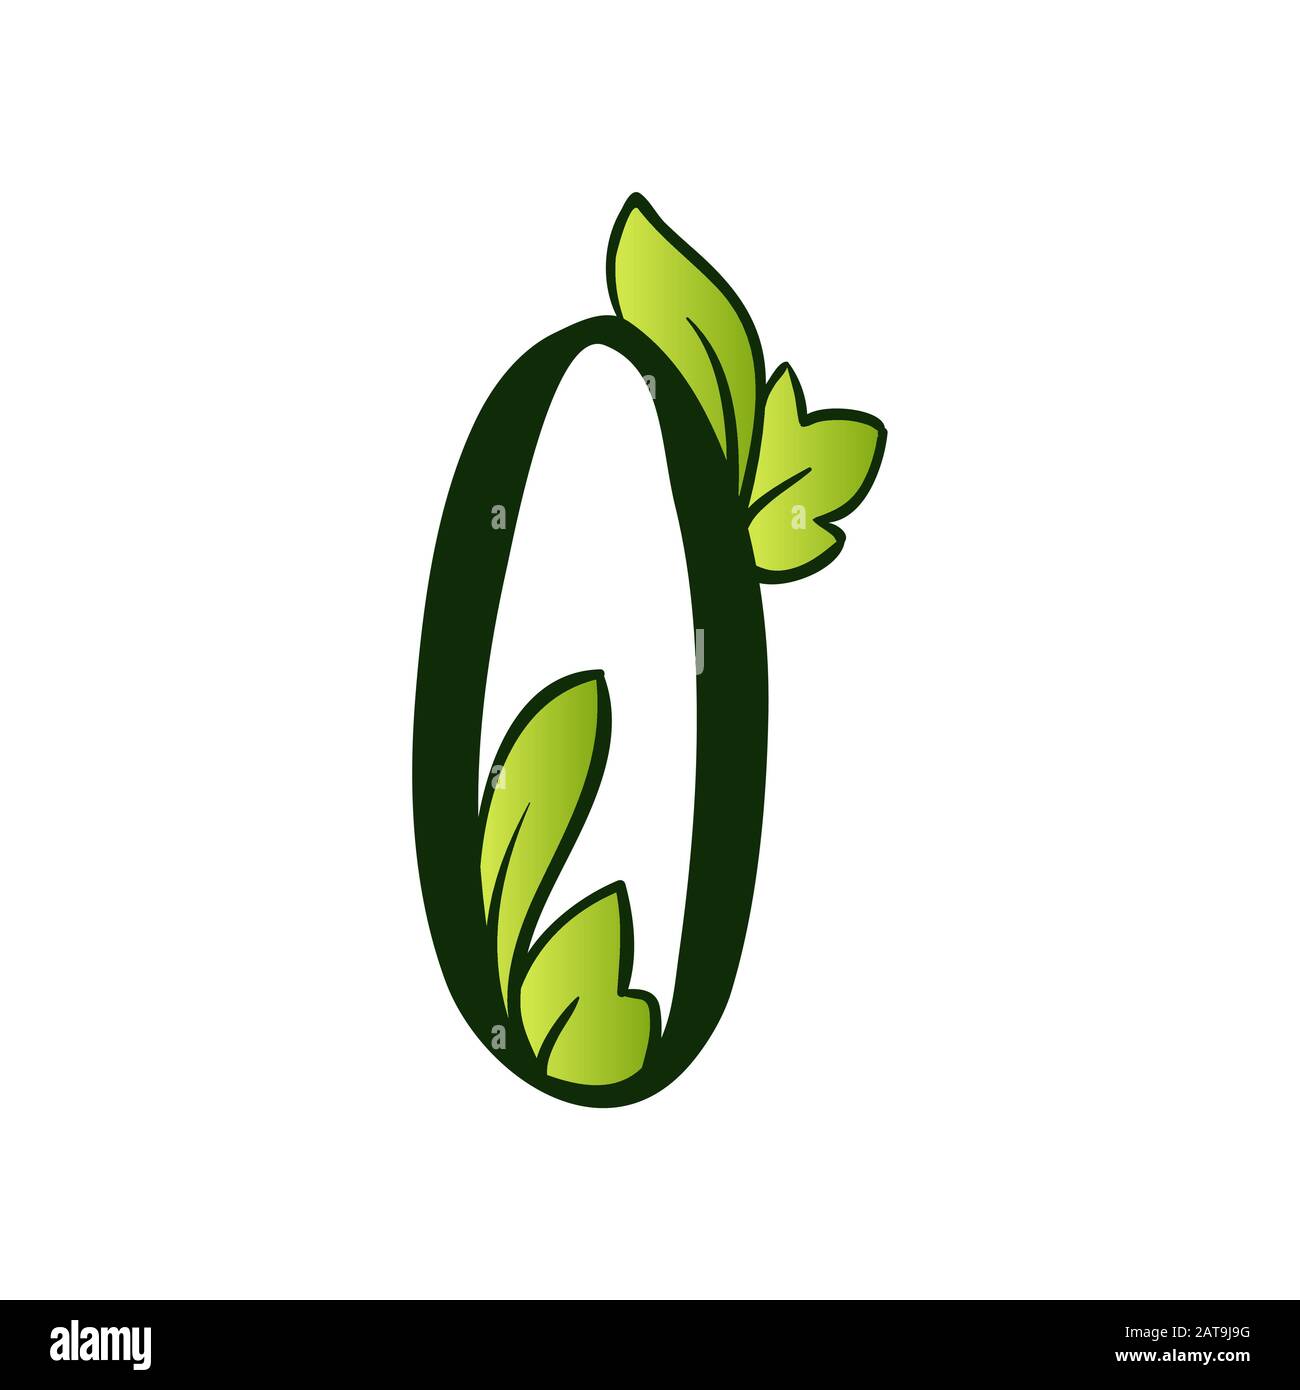 Green Doodling Eco Alphabet Zero Number Sign.Type with Leaves. Isolated Latin Uppercase. Typography Bold Spring Letter or Doodle abc Characters for Monogram Words and Logo. Stock Vector